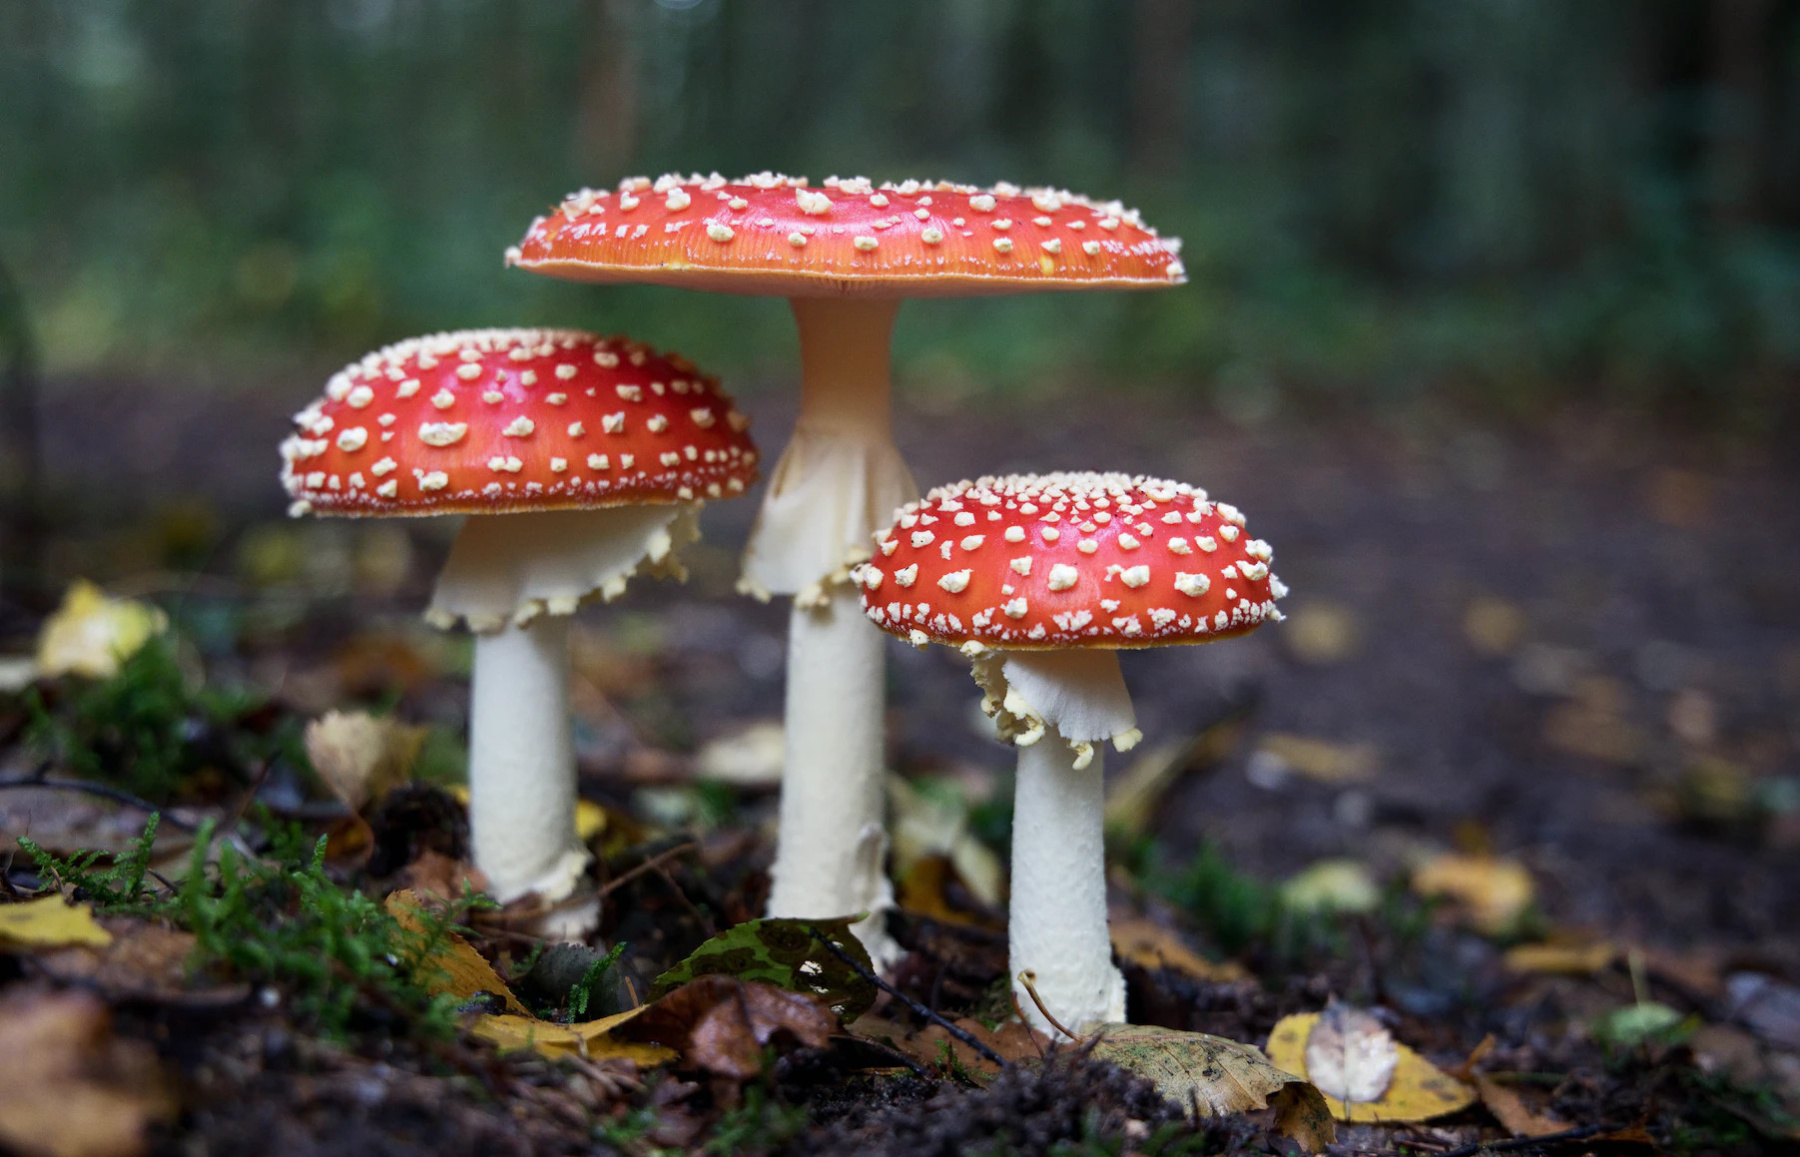 Learn how to recognize wild plants and mushrooms when picking 